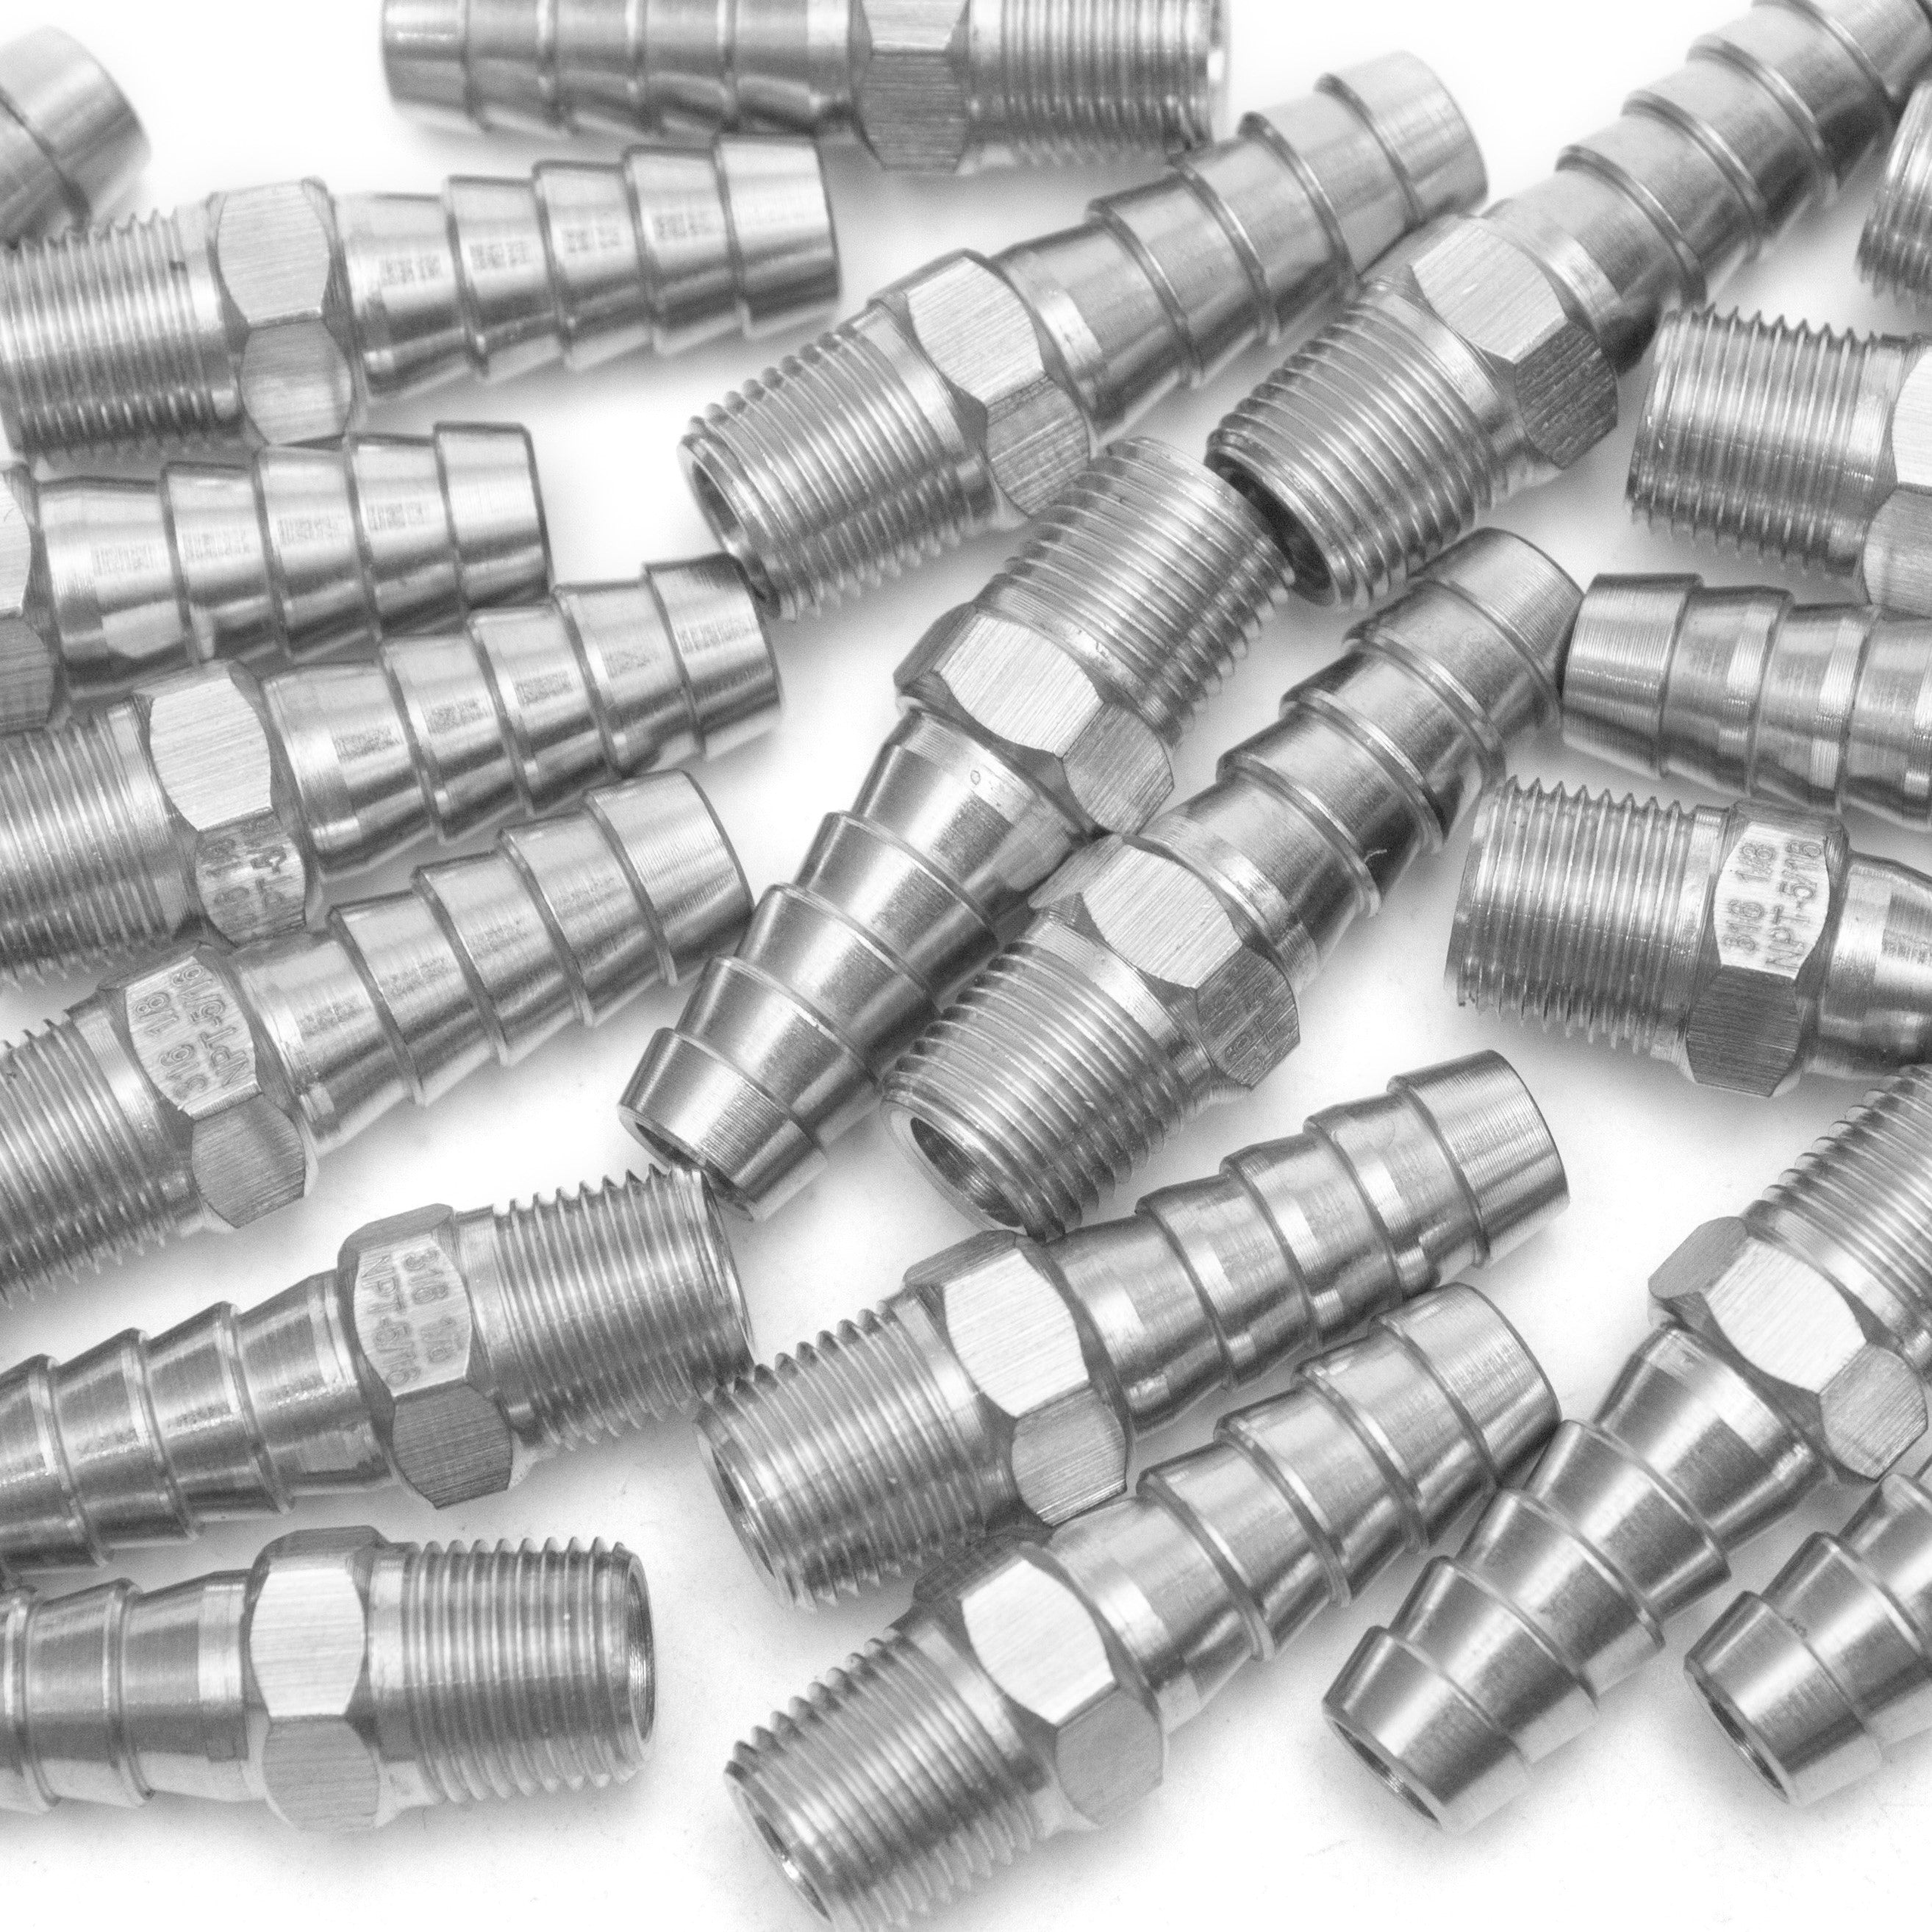 LTWFITTING Bar Production Stainless Steel 316 Barb Fitting Coupler/Connector 5/16 Inch Hose ID x 1/8 Inch Male NPT Air Fuel Water (Pack of 1000)